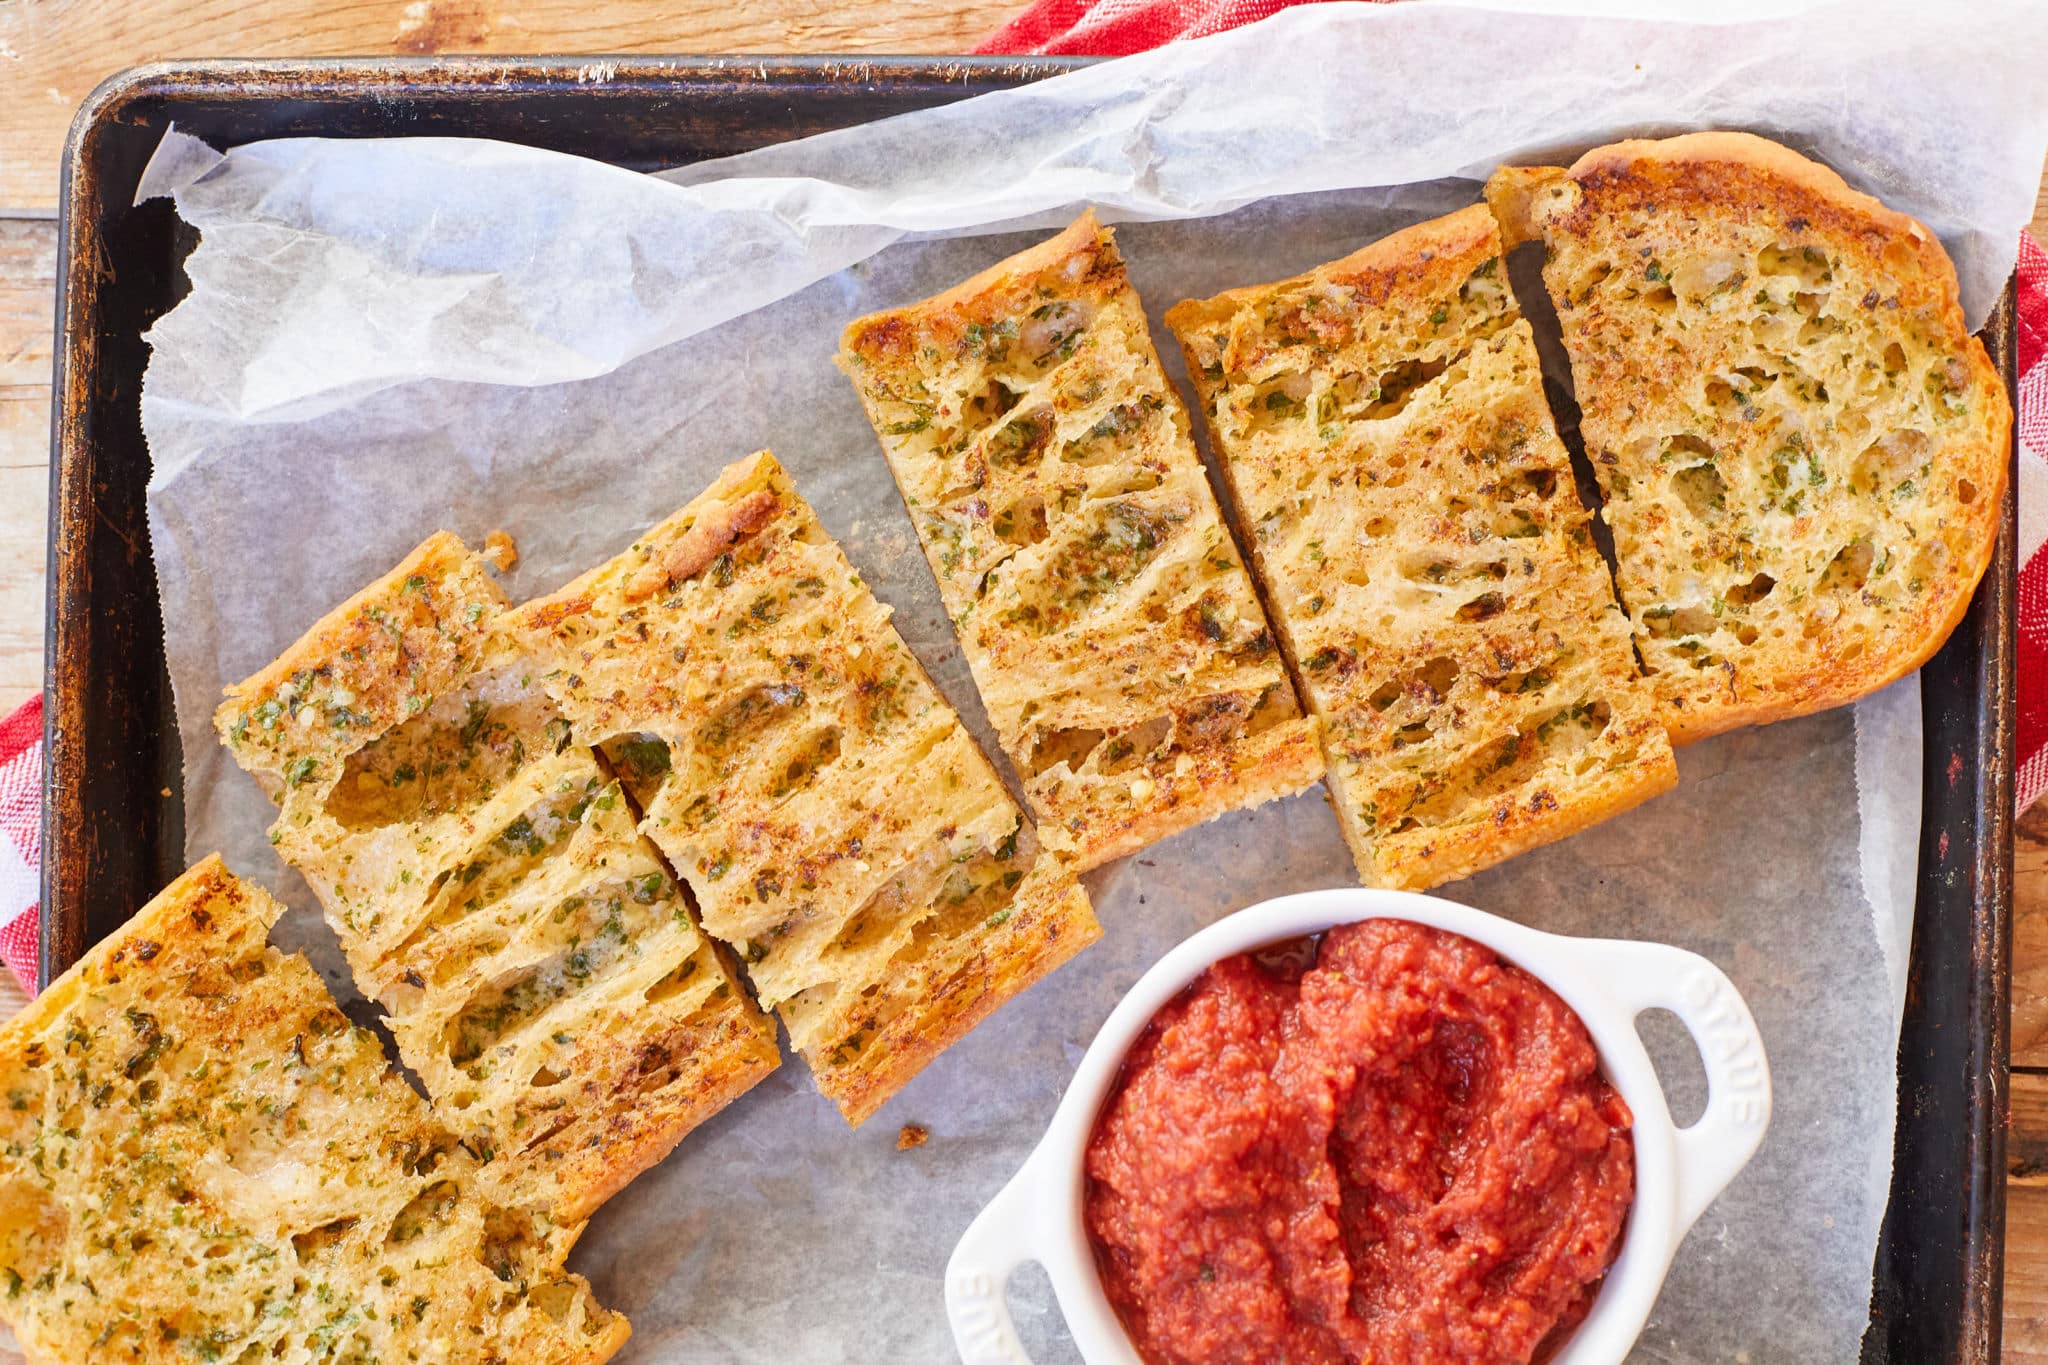 Homemade garlic bread from scratch is cut up into pieces and served alongside homemade pizza sauce.